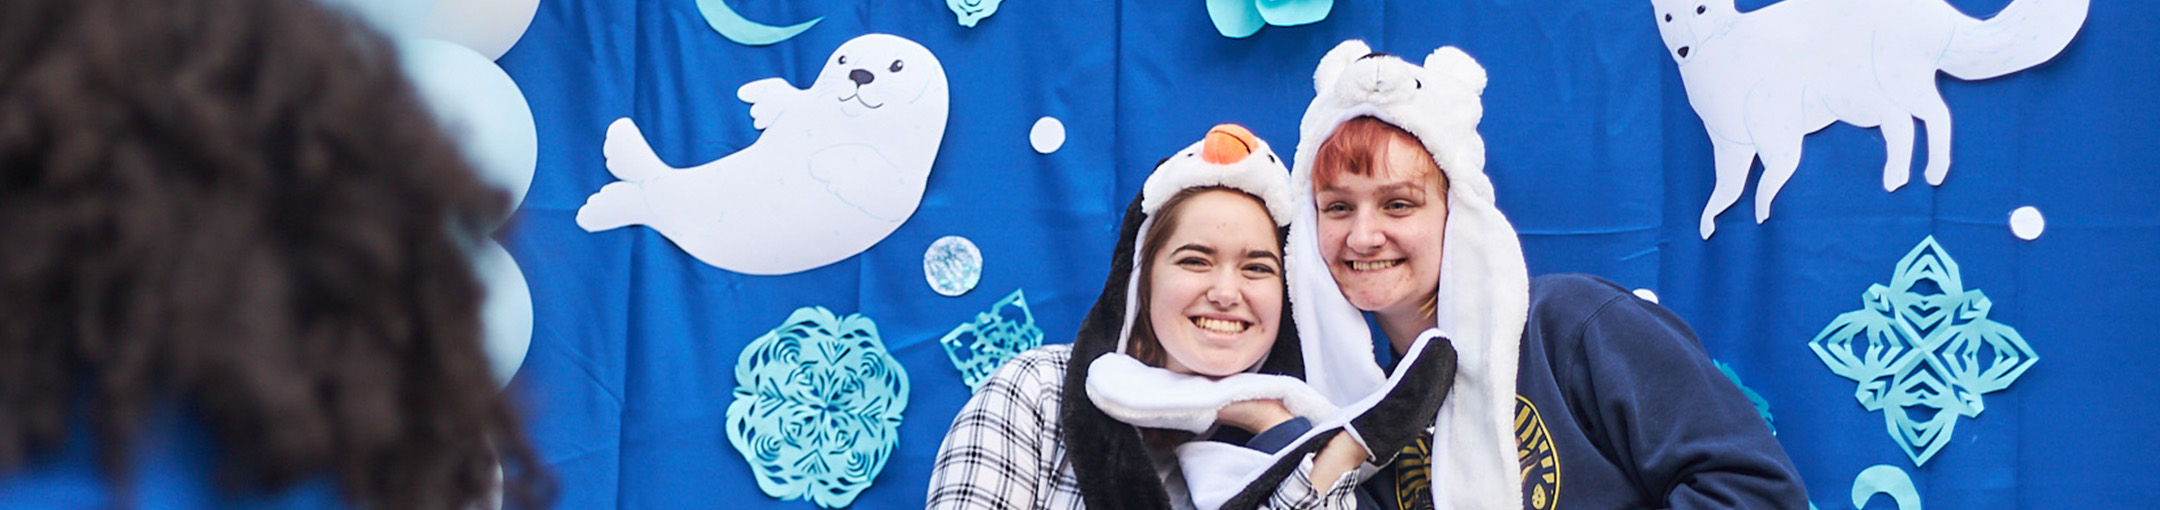 Two students pose for a picture against a blue FreezeFest-themed backdrop featuring cut outs of seals, foxes, and snow flakes